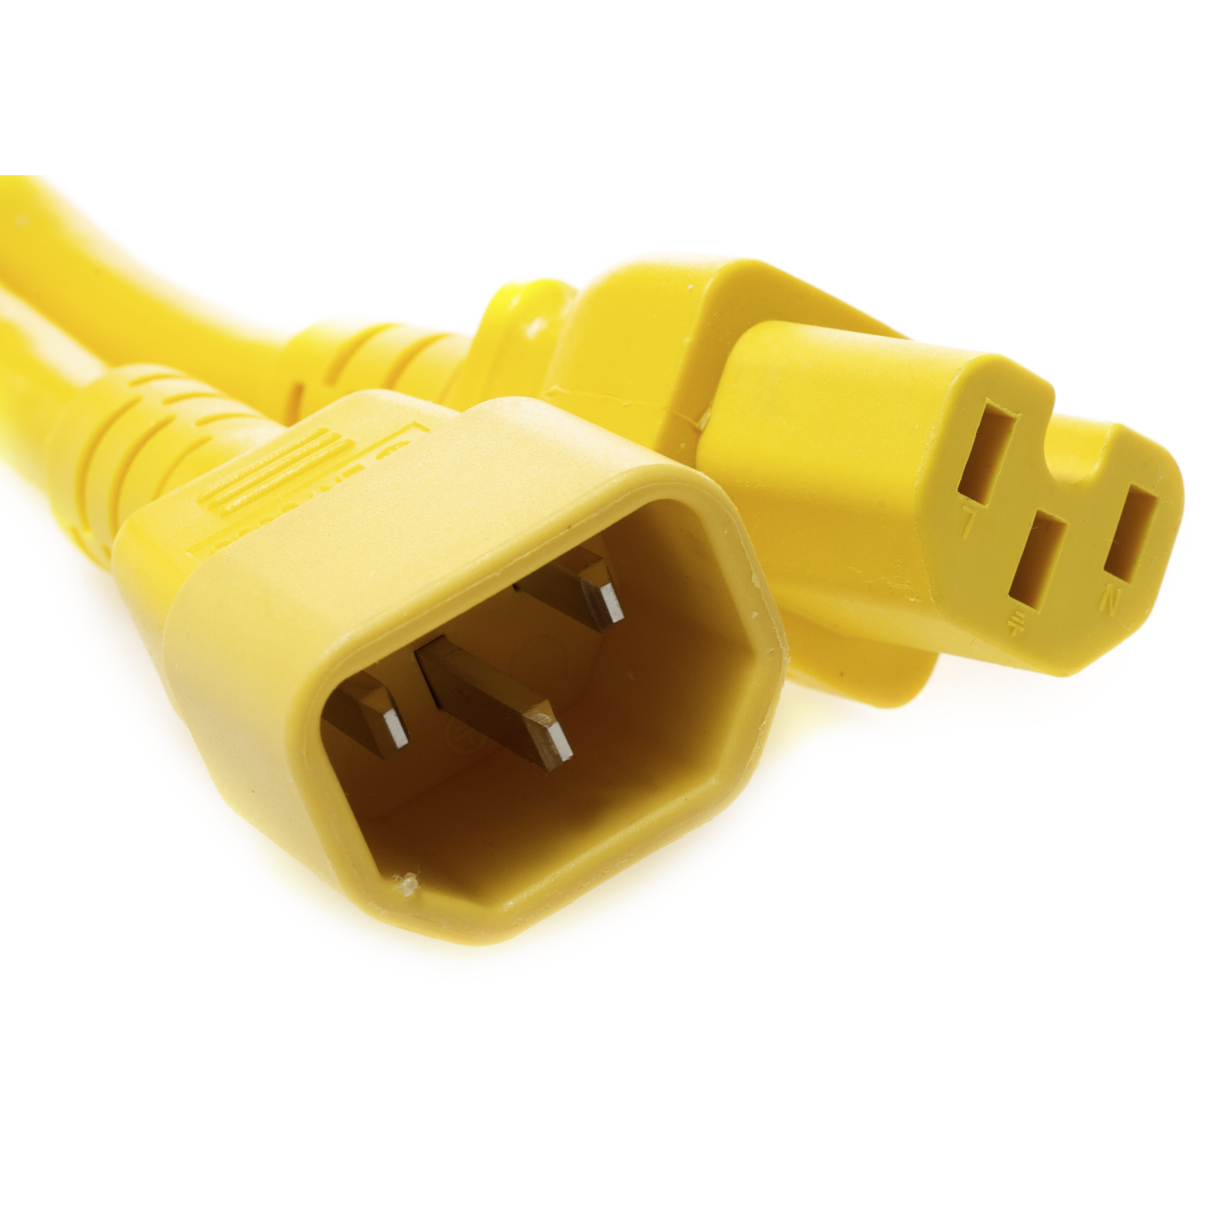 C14 To C15 Power Cables- All Colors